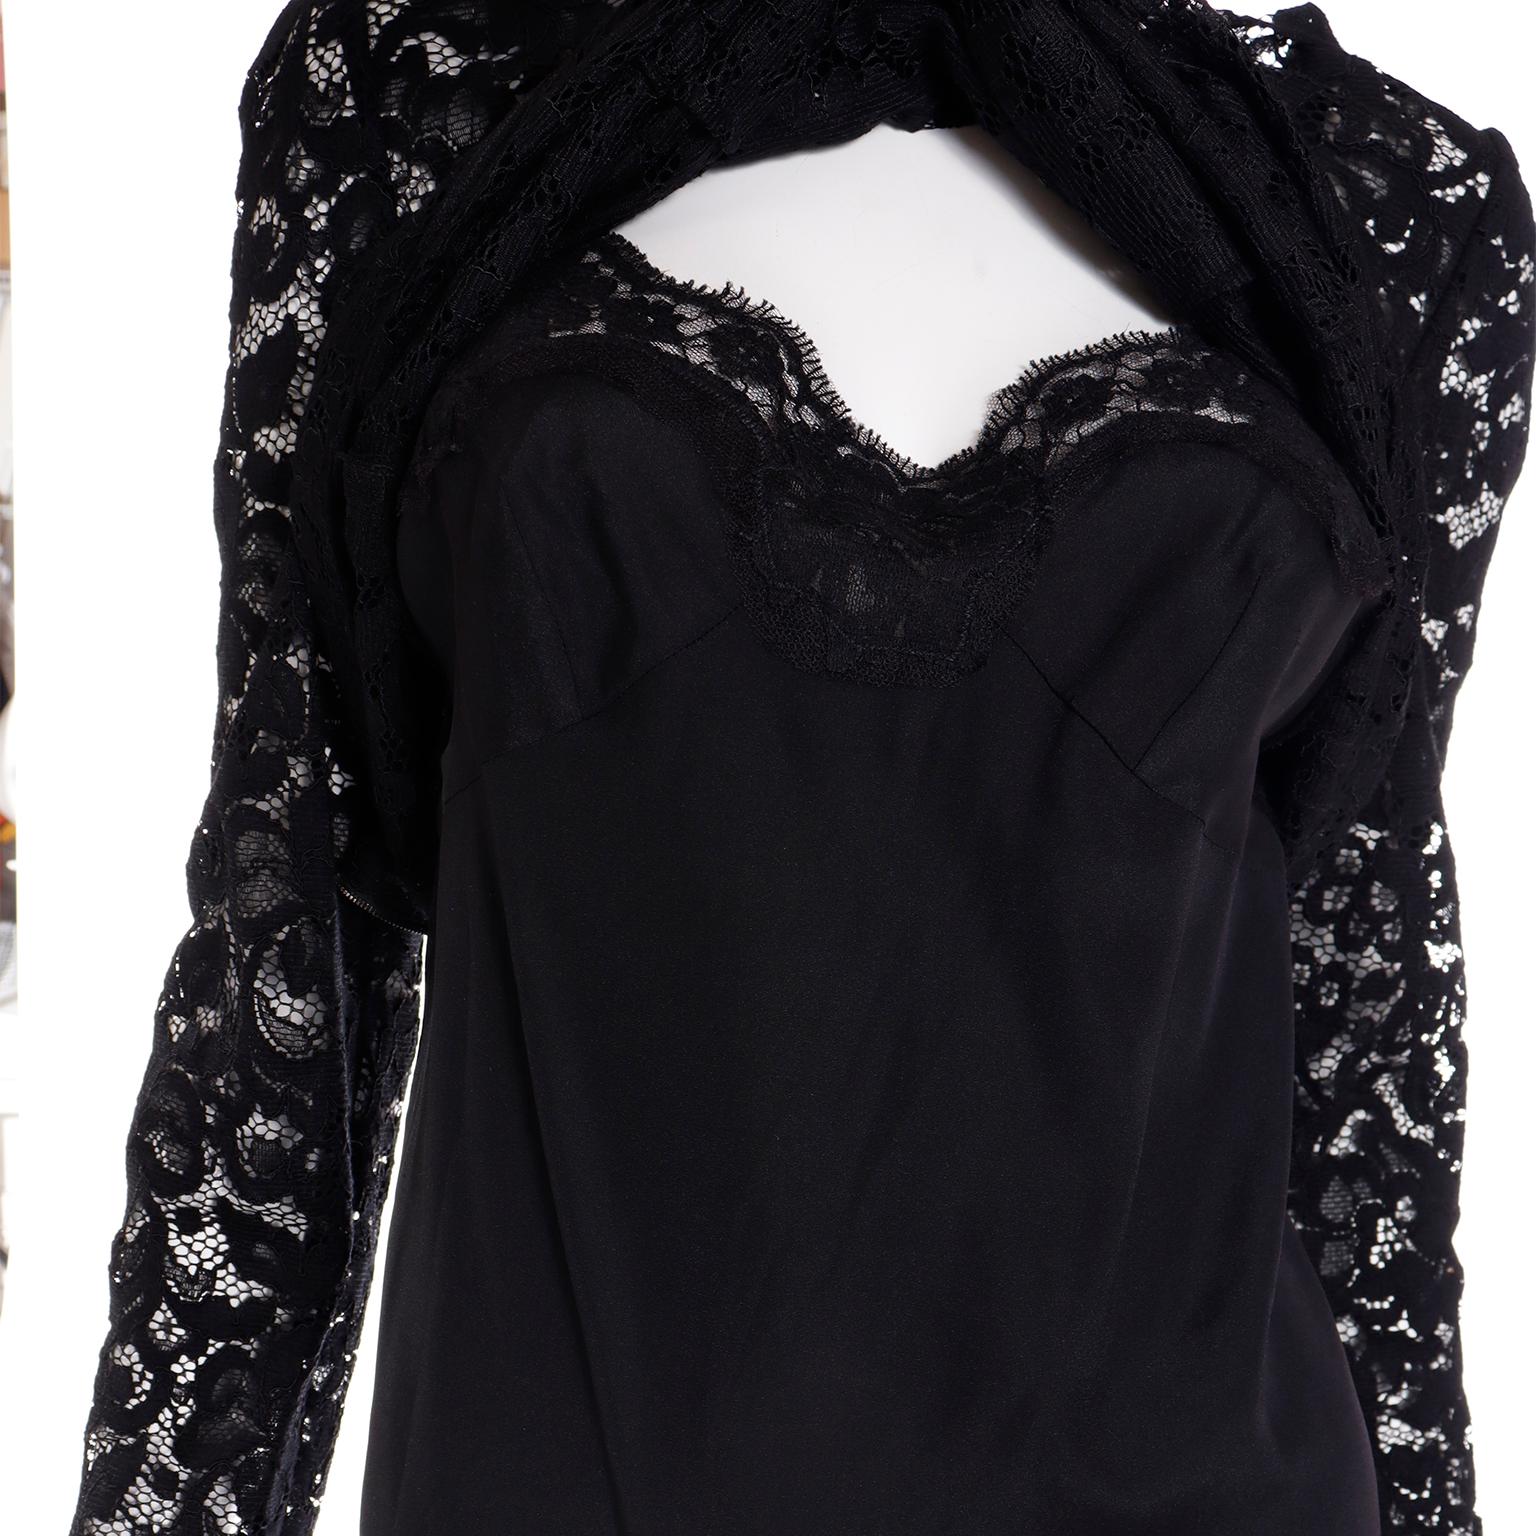 Dolce & Gabbana Black Lace Blouse Top With Long Sleeves & Built in Camisole For Sale 3